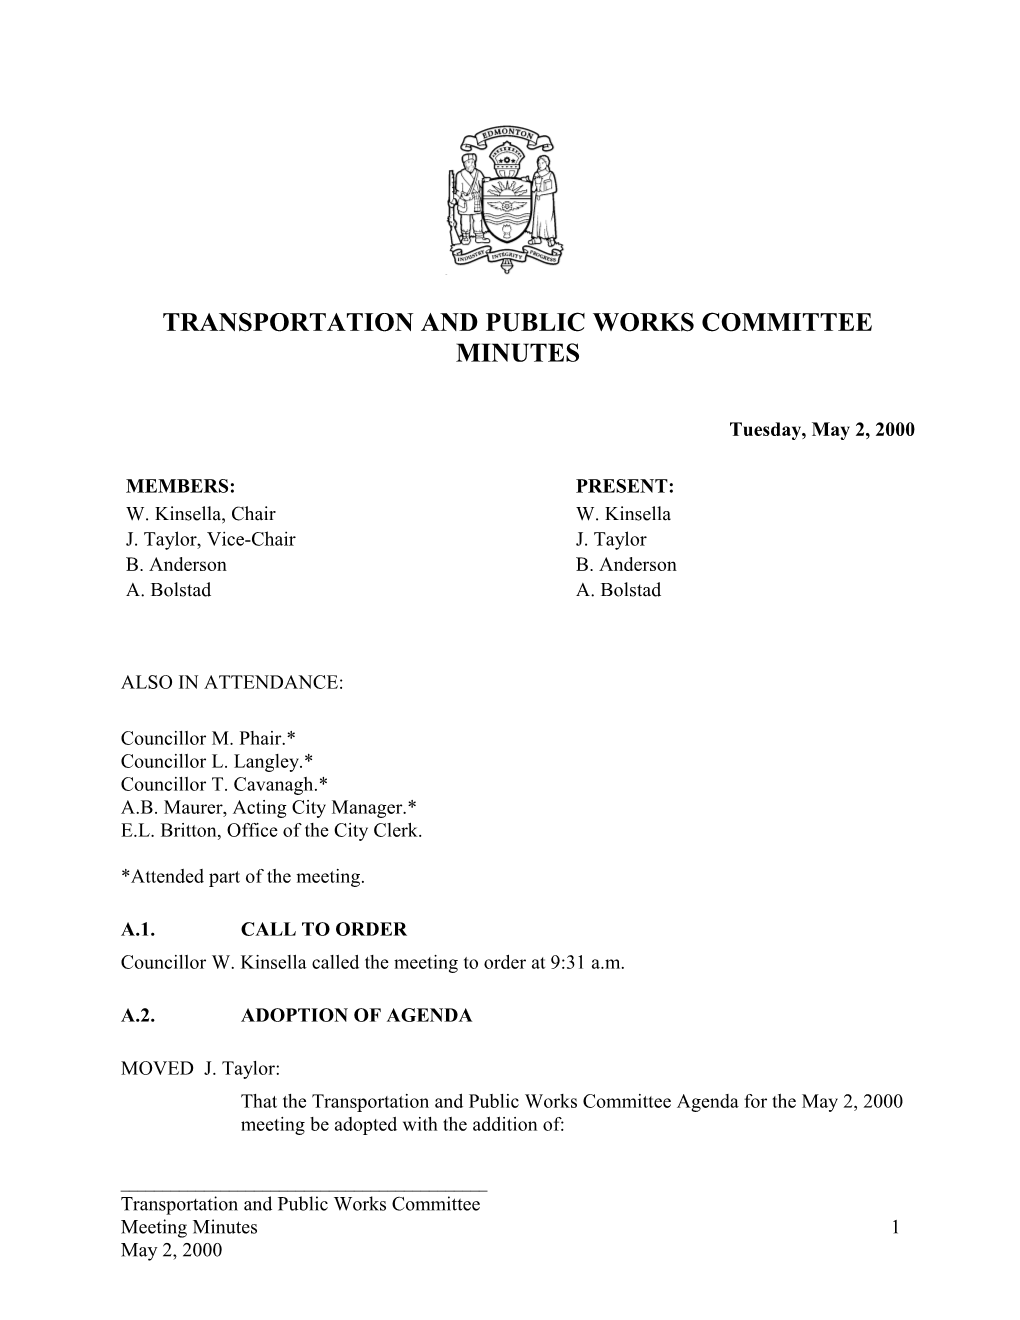 Minutes for Transportation and Public Works Committee May 2, 2000 Meeting